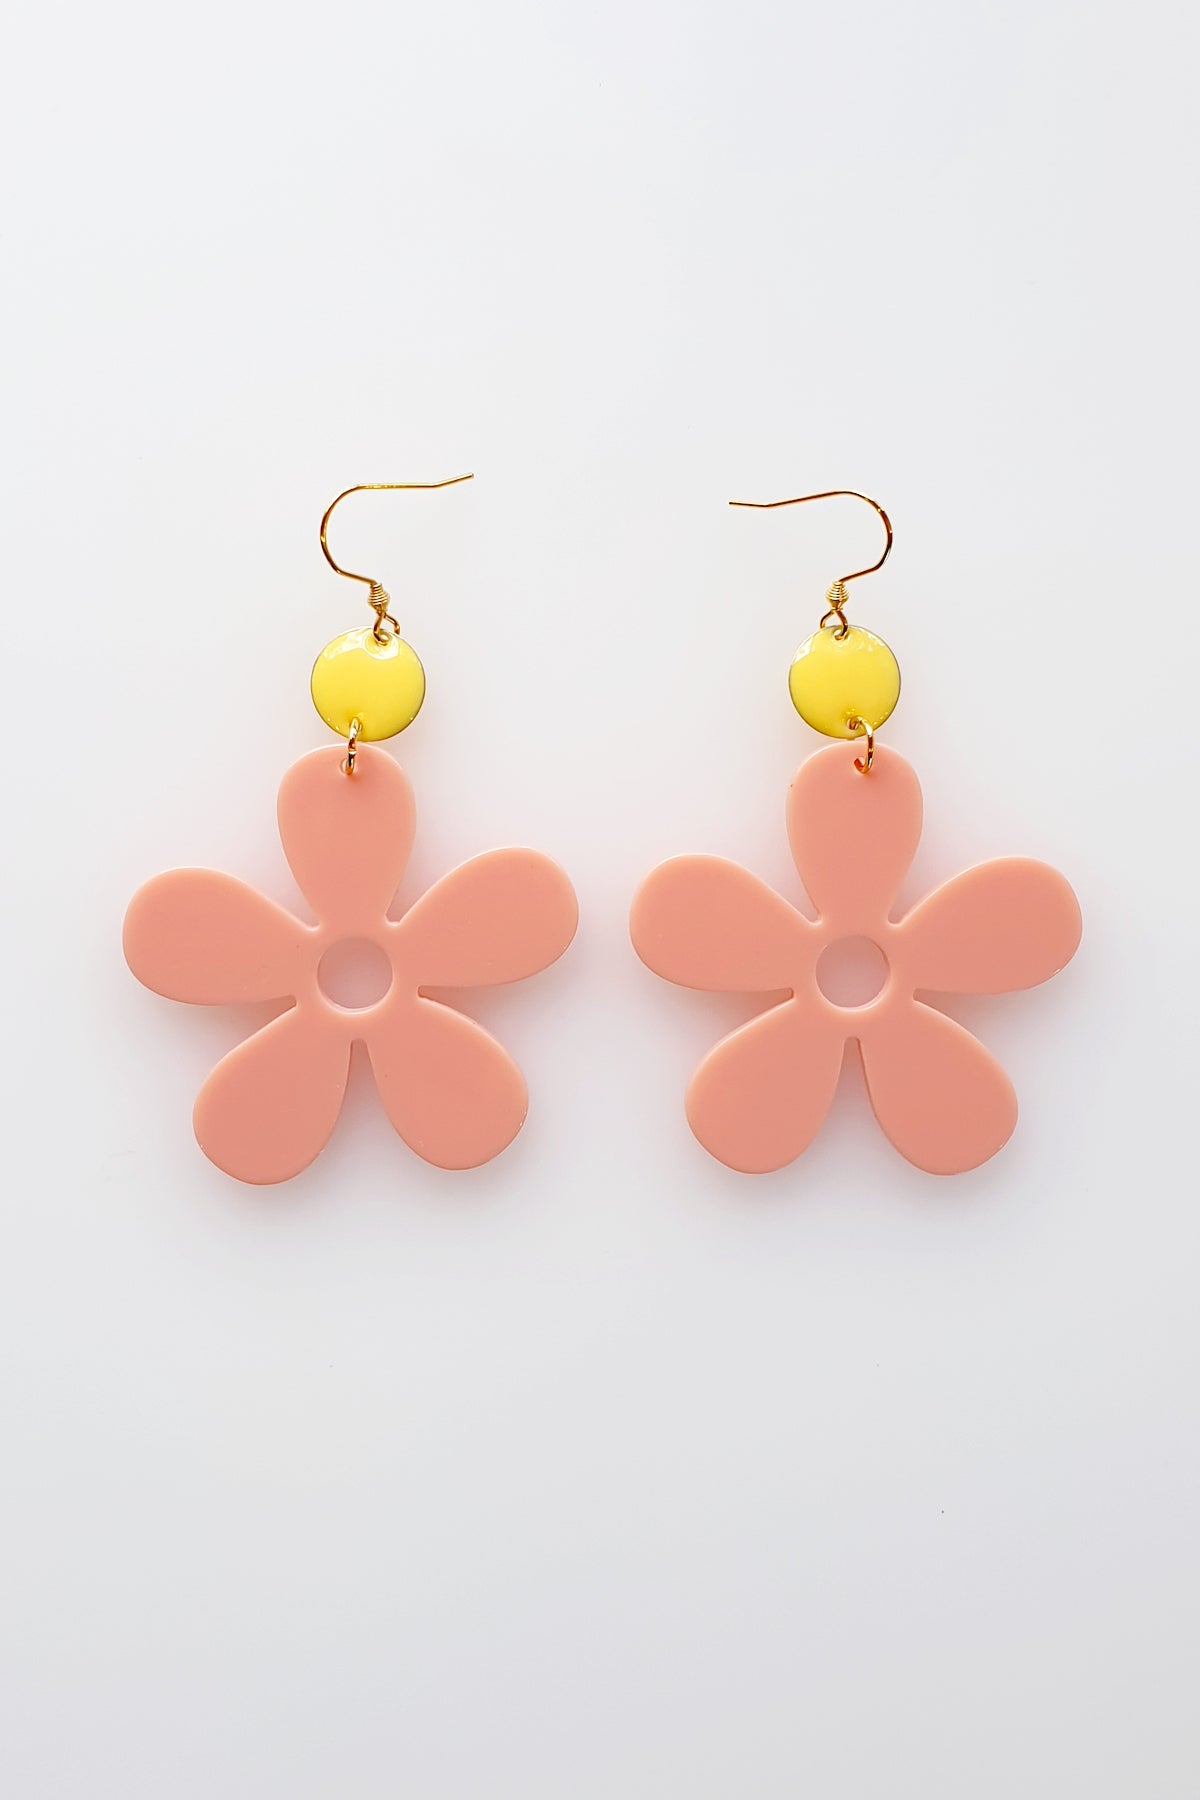 A pair of peach acrylic daisy dangle earrings with a lemon yellow enamel dot attached to a hook. Pictured flat against a white background.